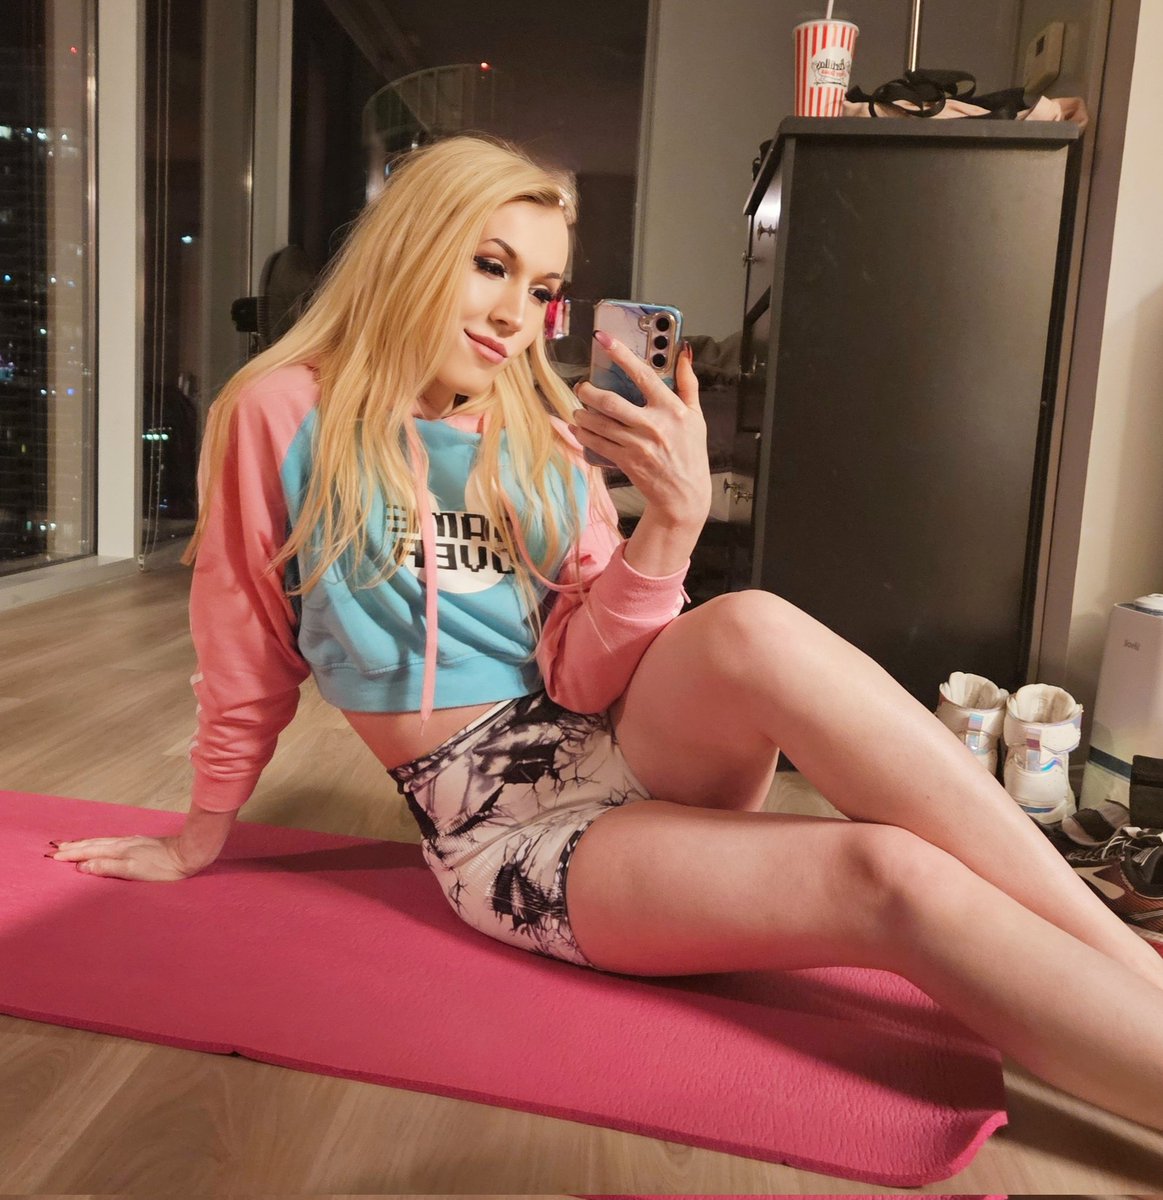 Workout Day 698: Home from an amazing night! 😊 A bit tipsy but perfect time for yoga. I honestly felt so limber tonight. 🥰